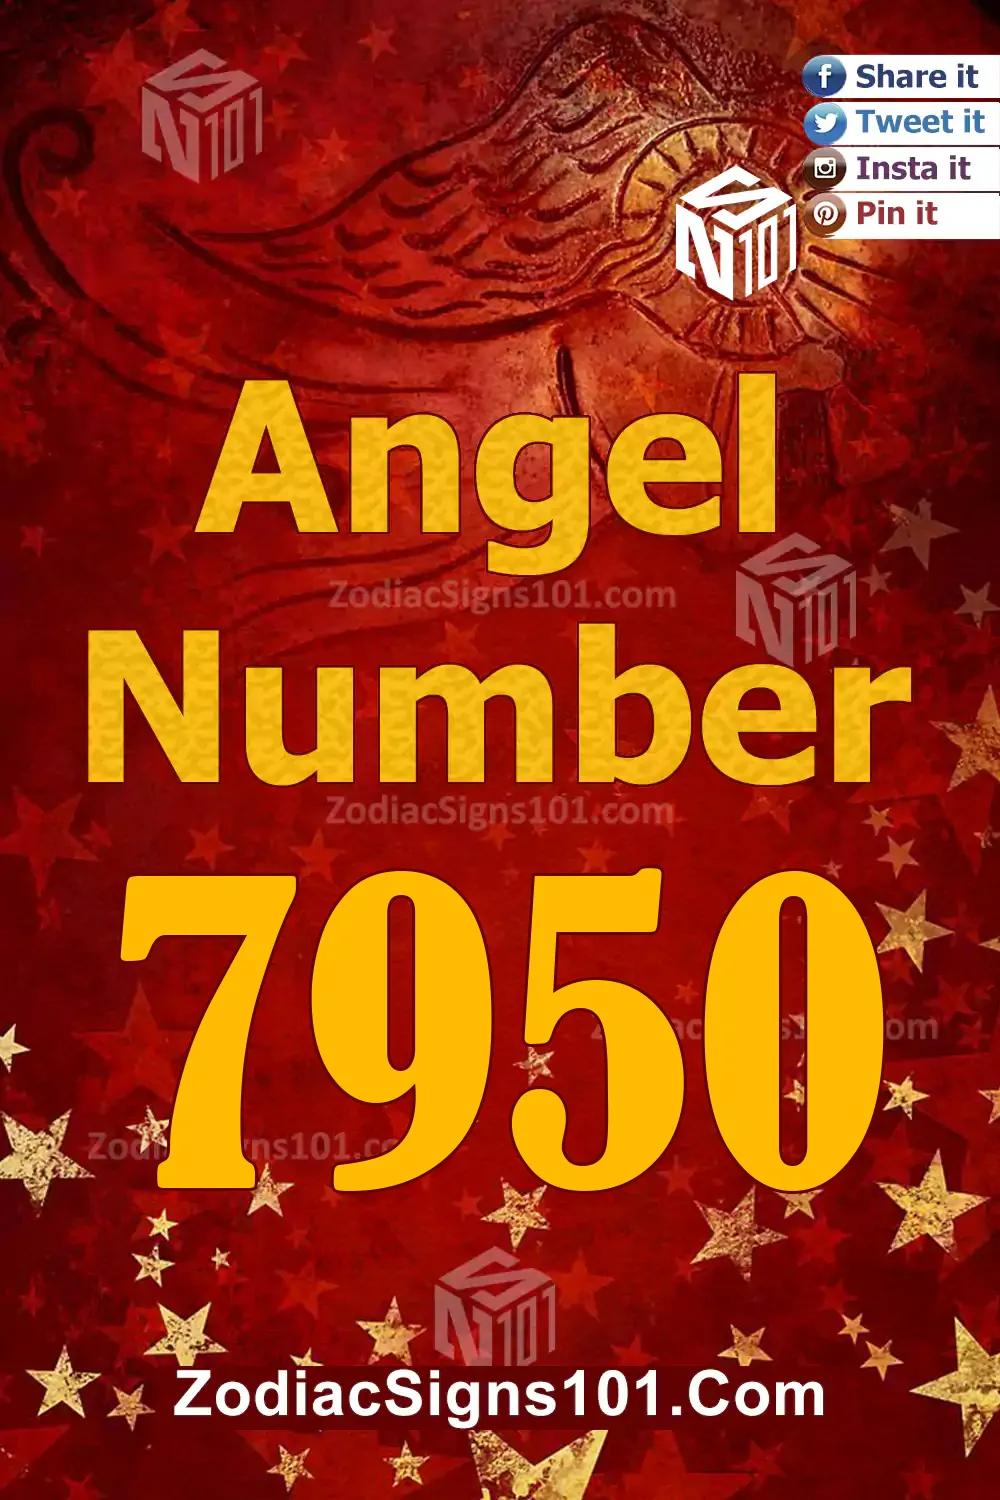 7950 Angel Number Meaning